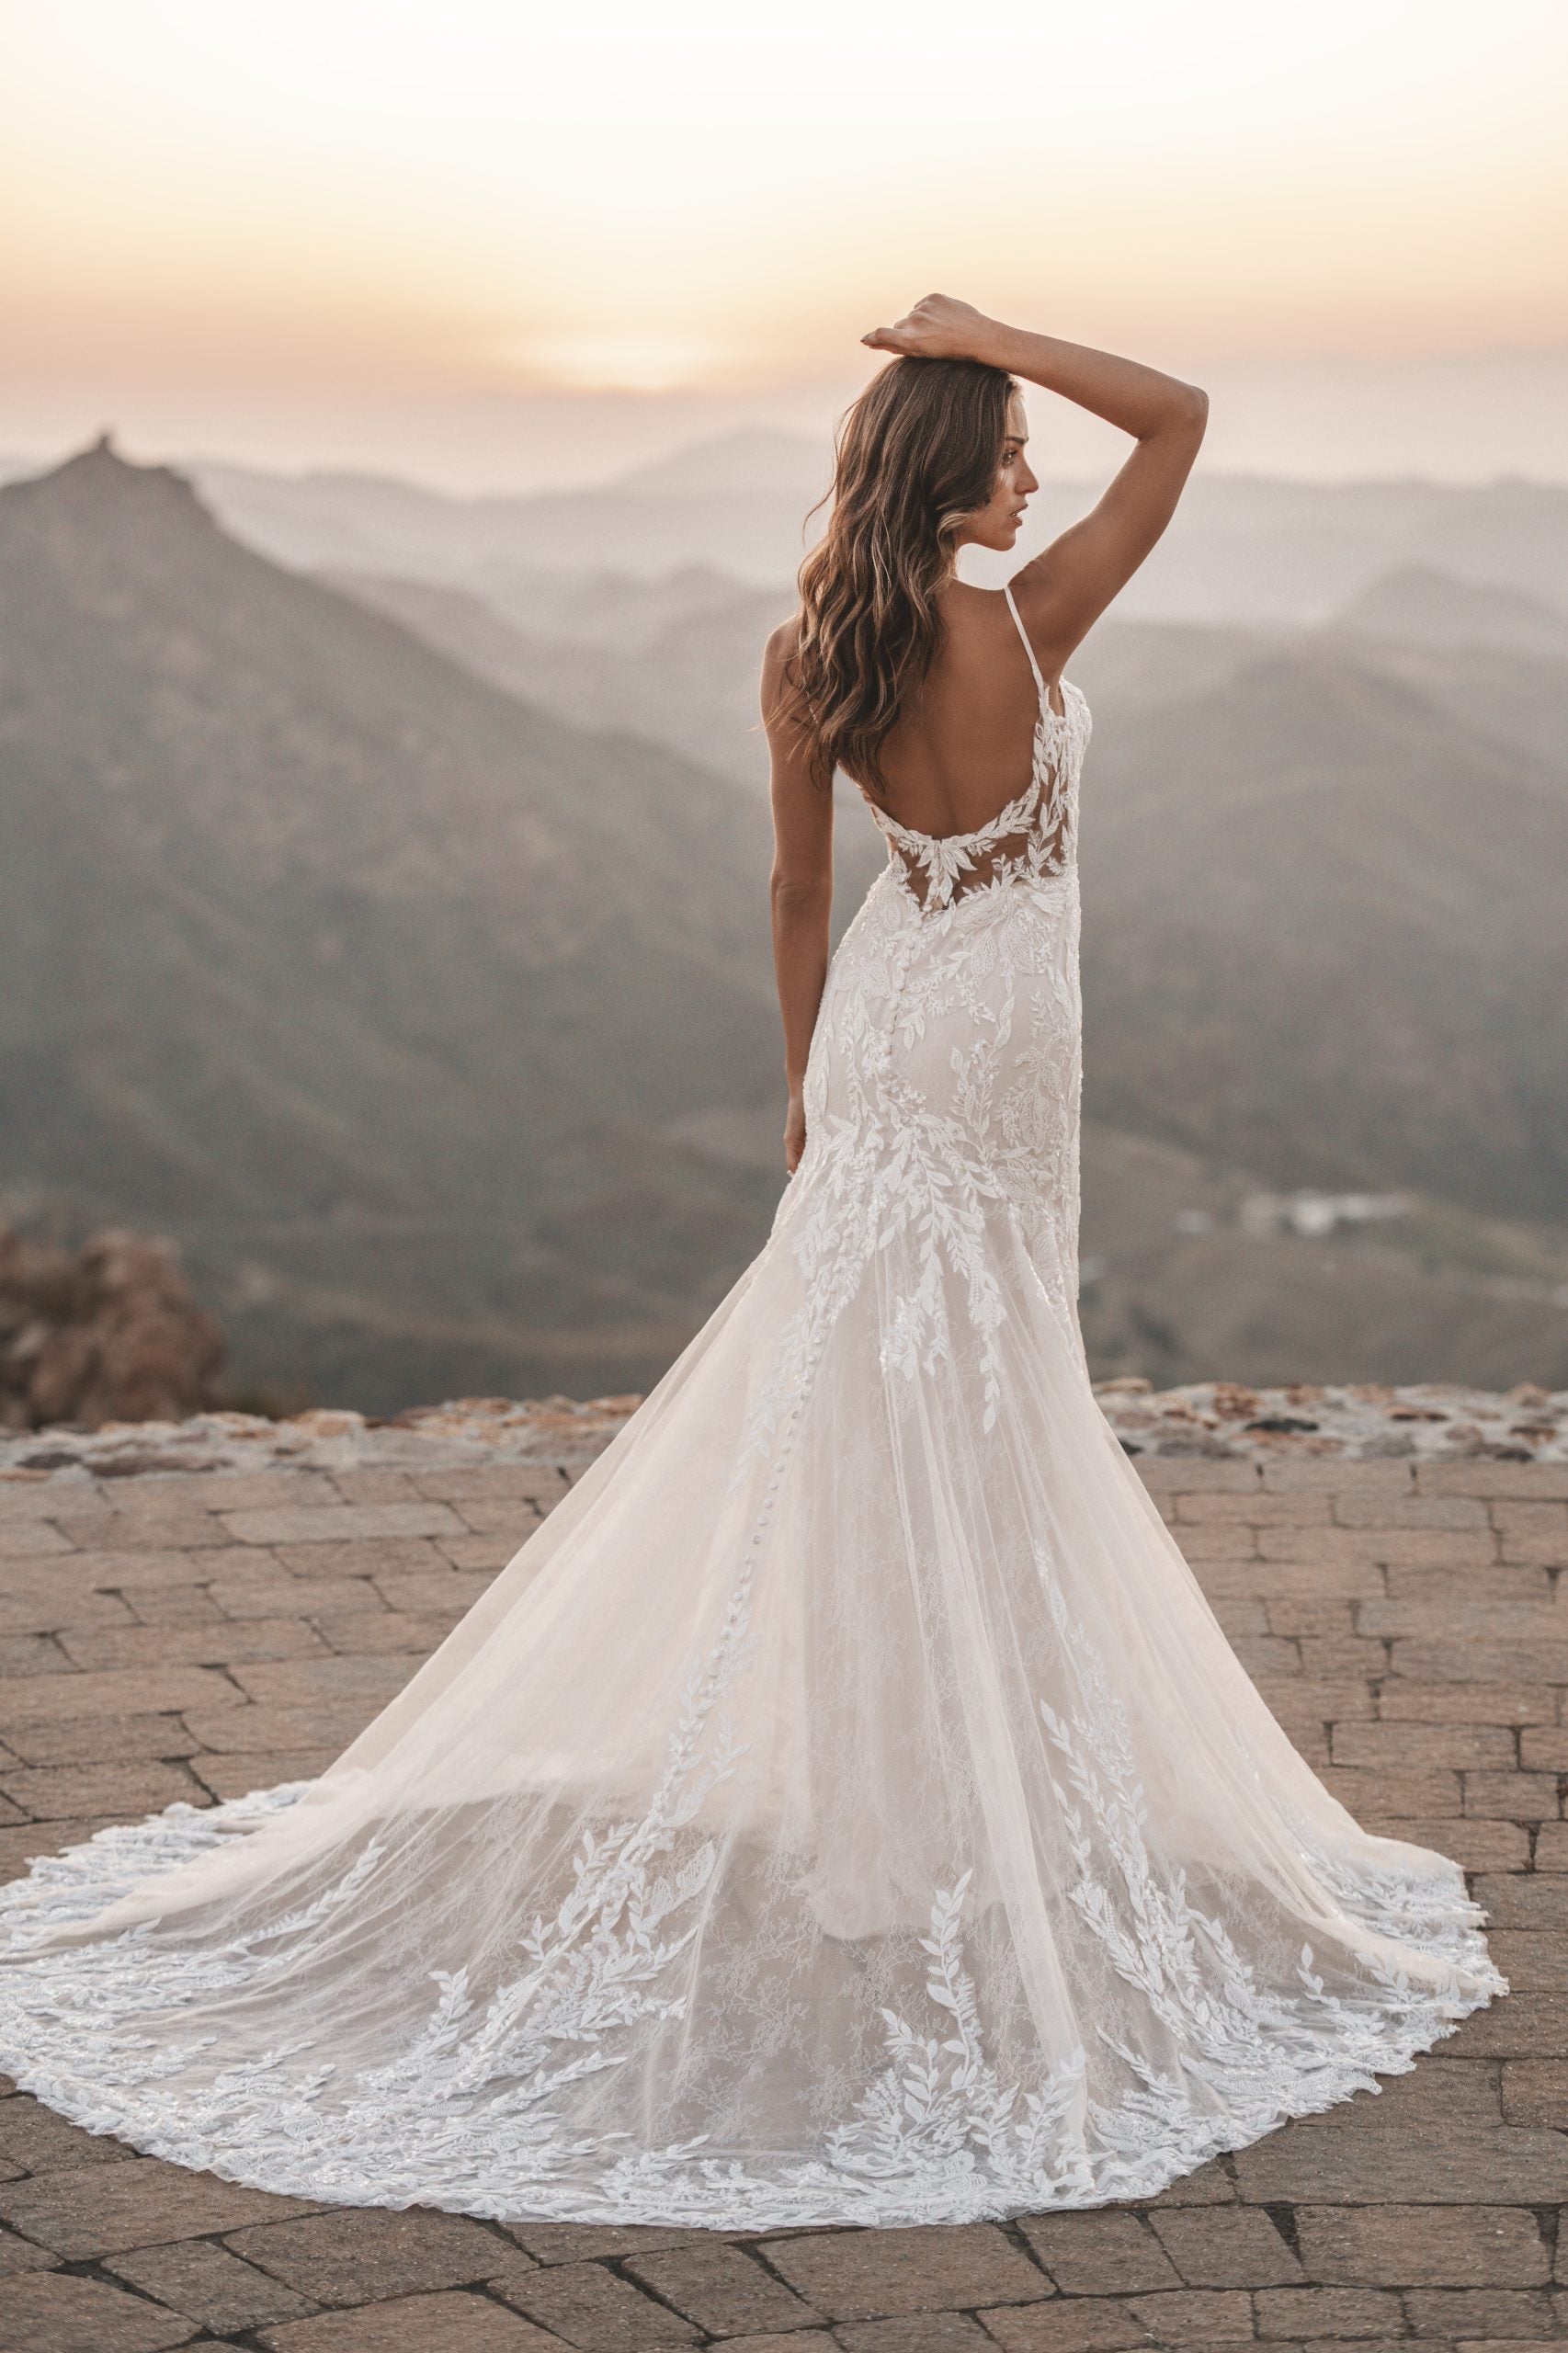 Romantic Fit-and-Flare Gown With Low Back by Allure Bridals - Image 2